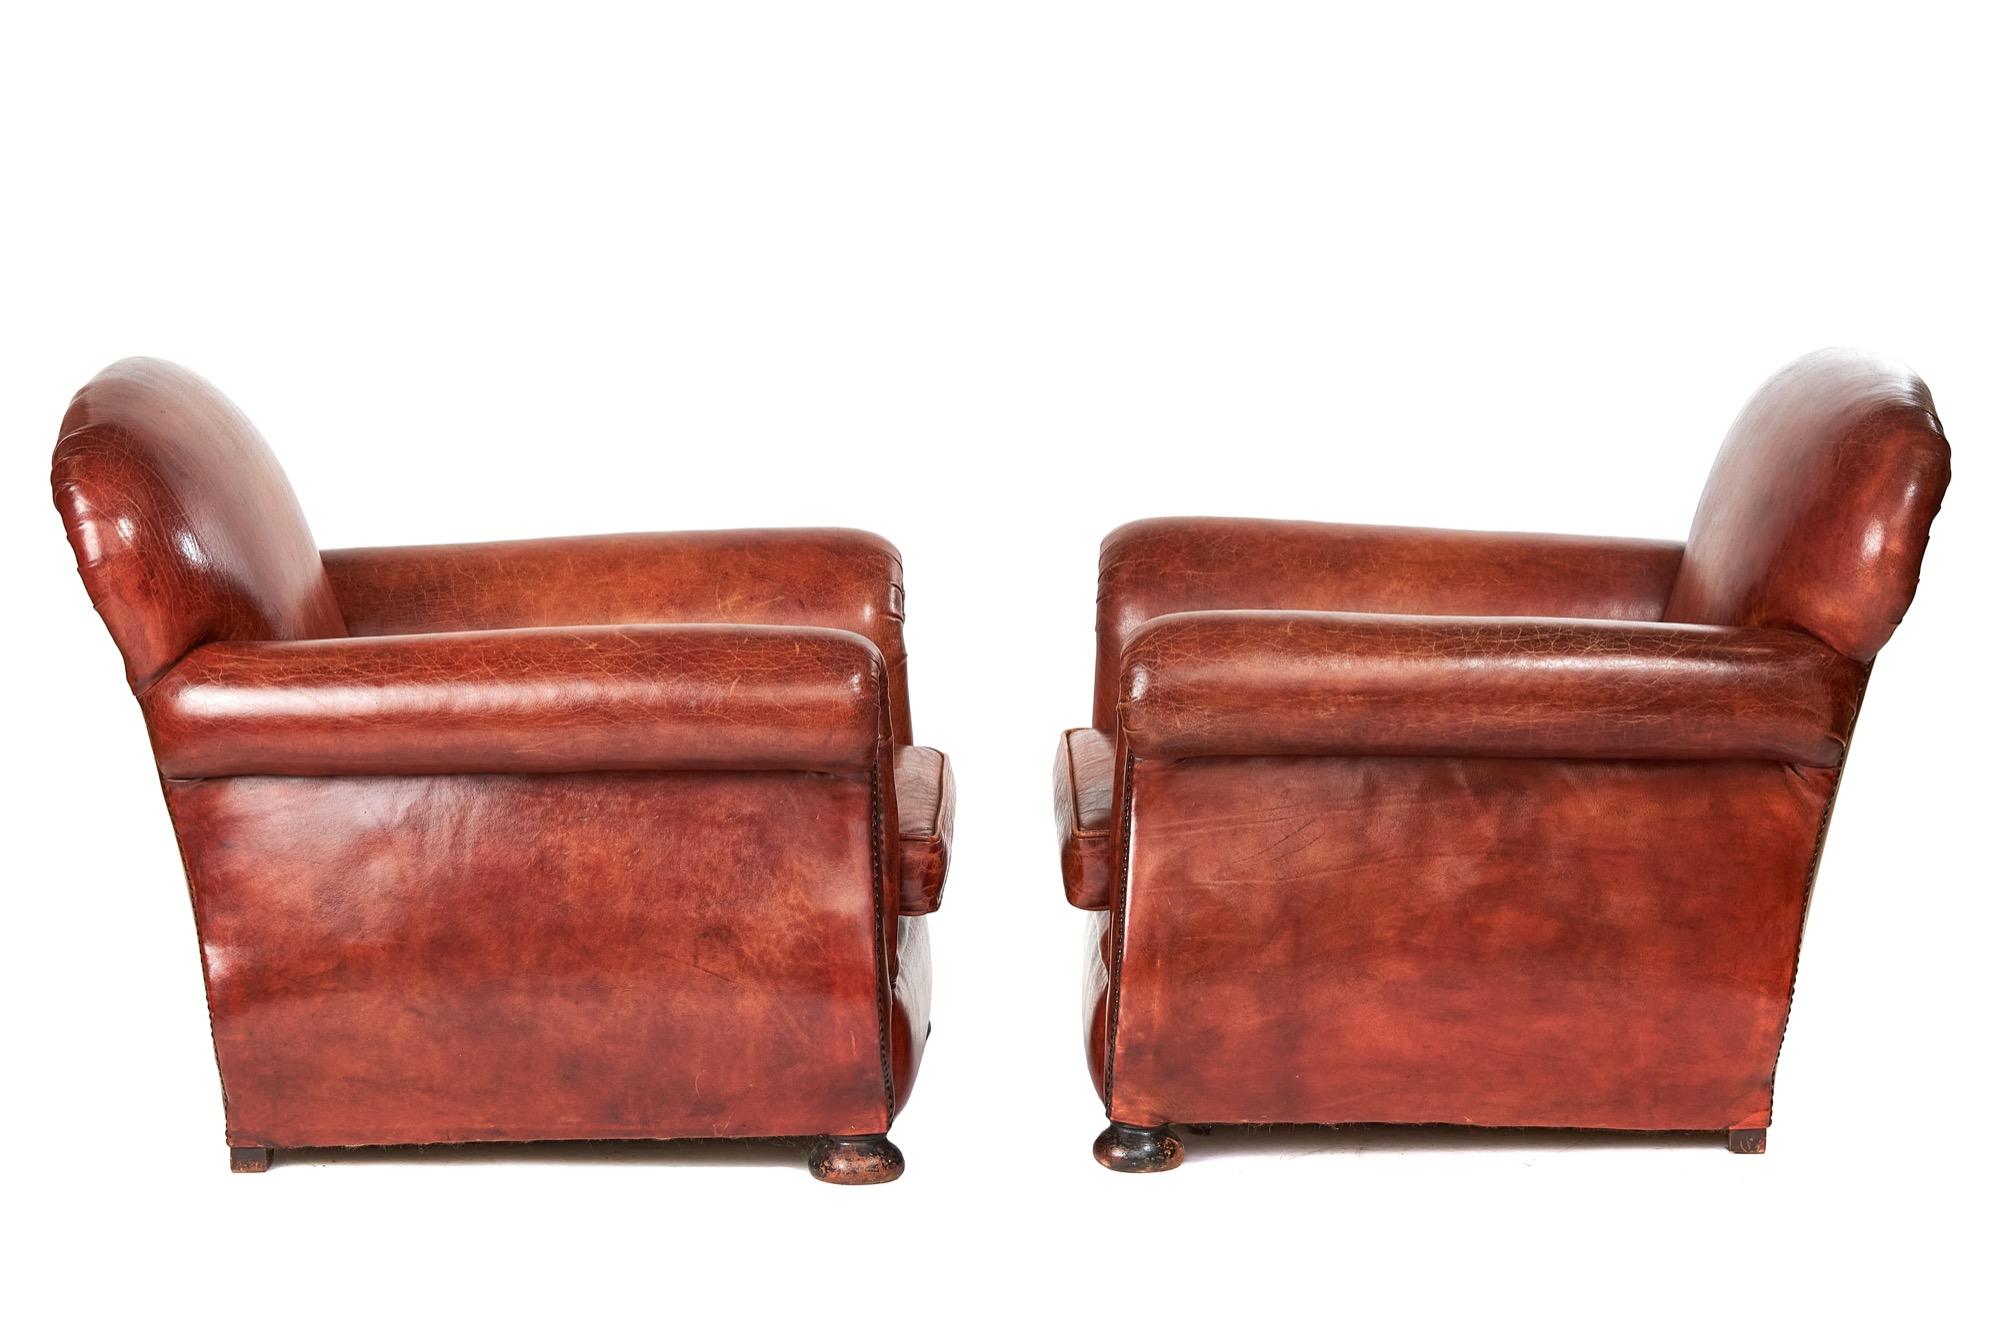 Polished Pair Leather Club Chairs, circa 1920s